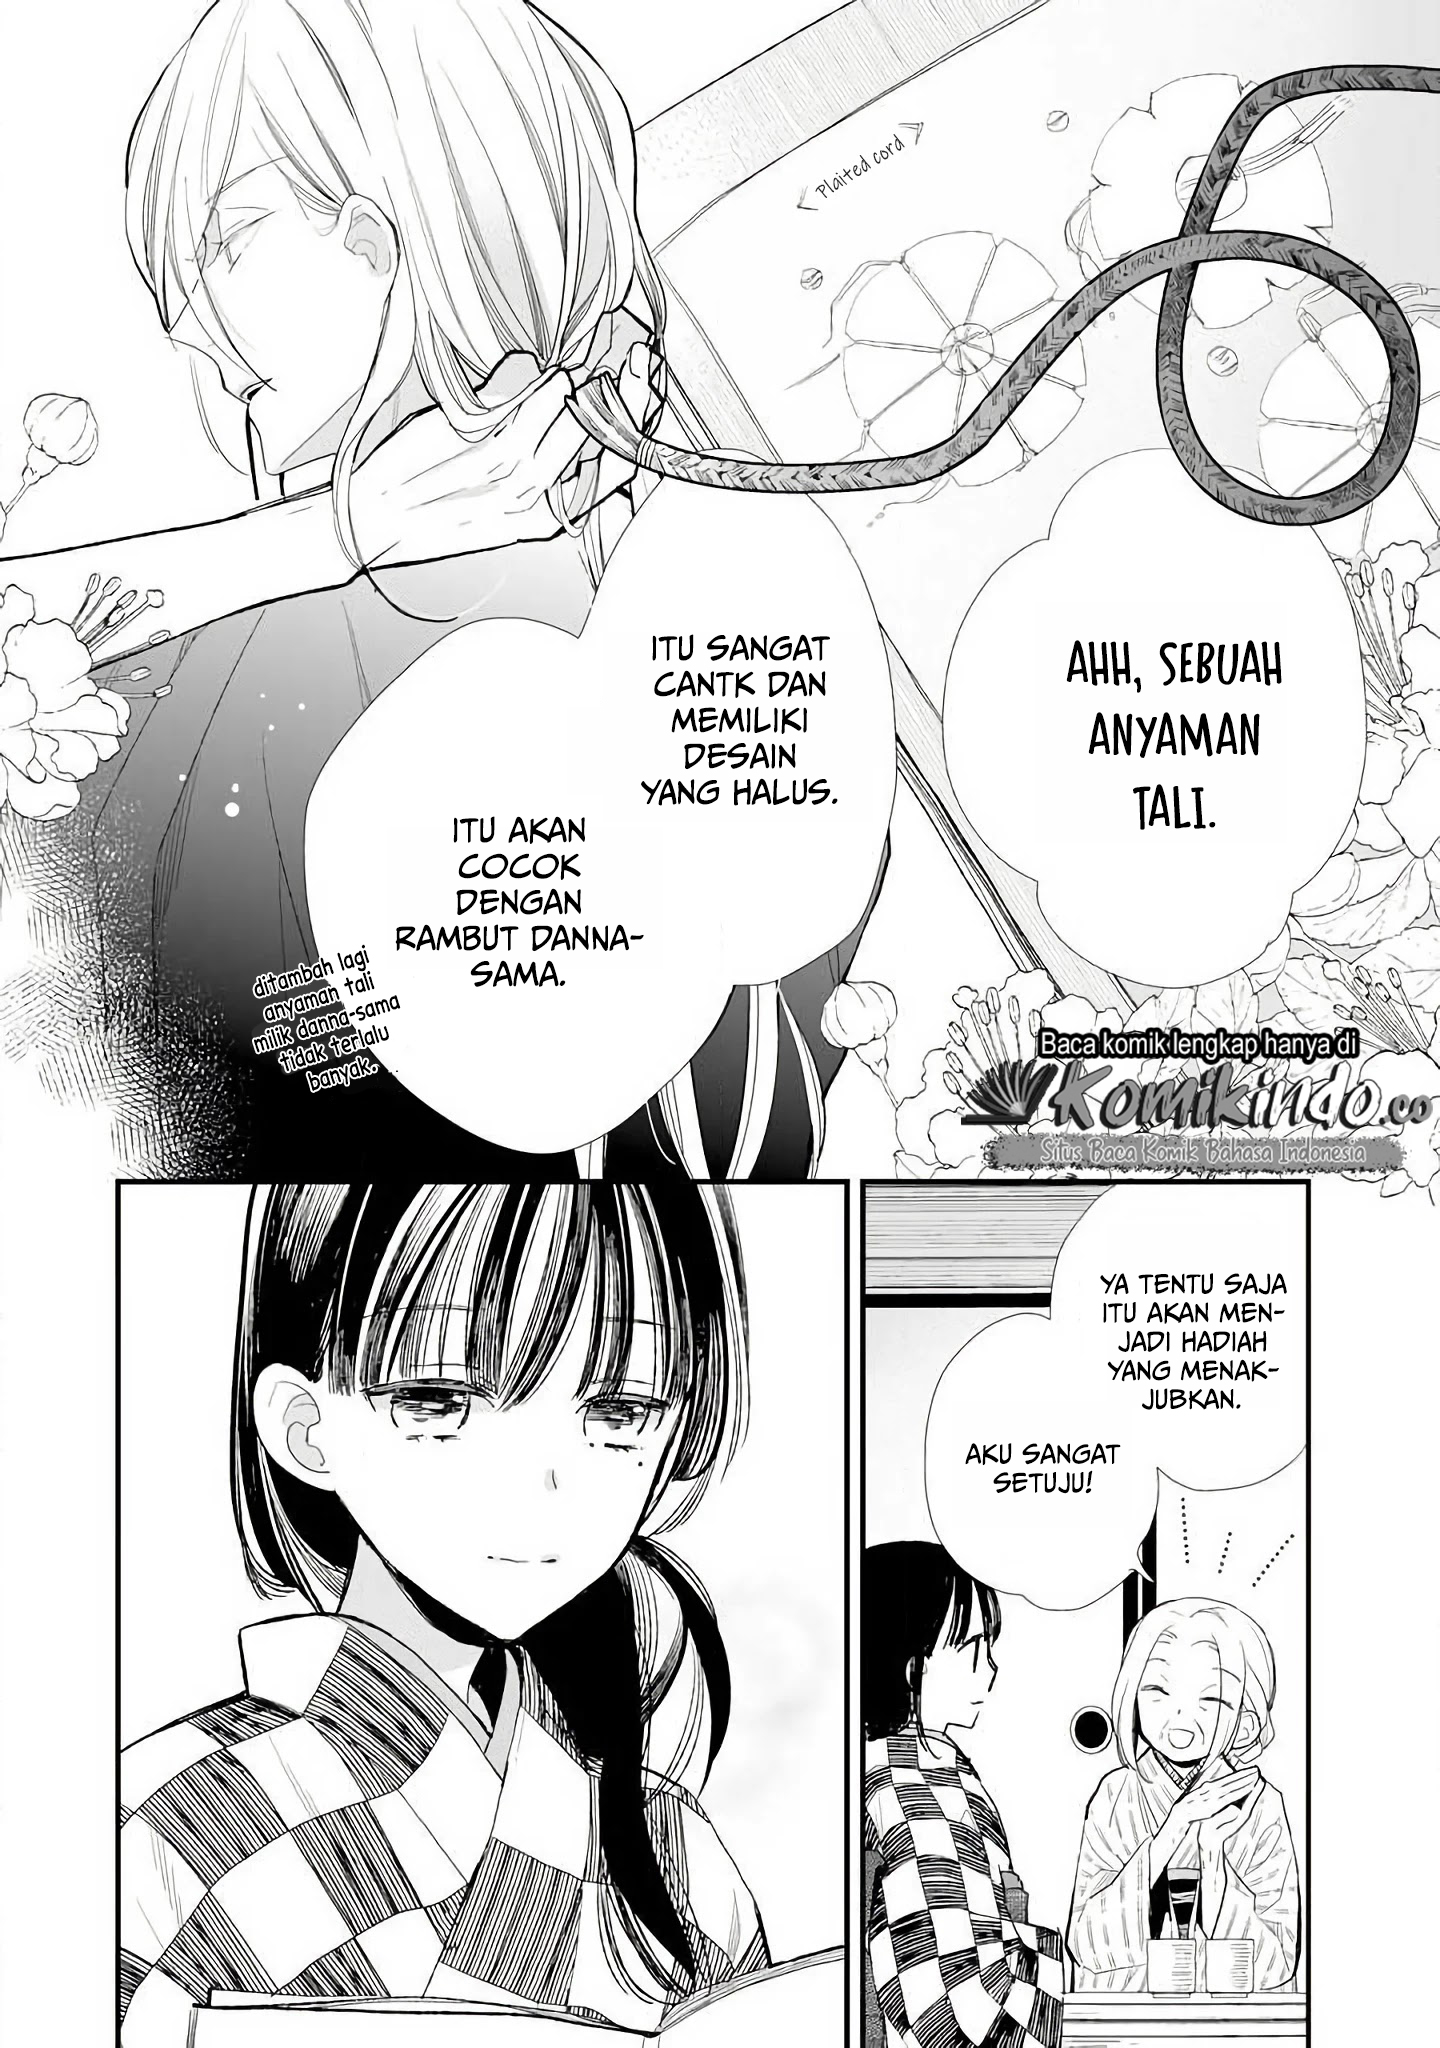 My Blissful Marriage Chapter 08